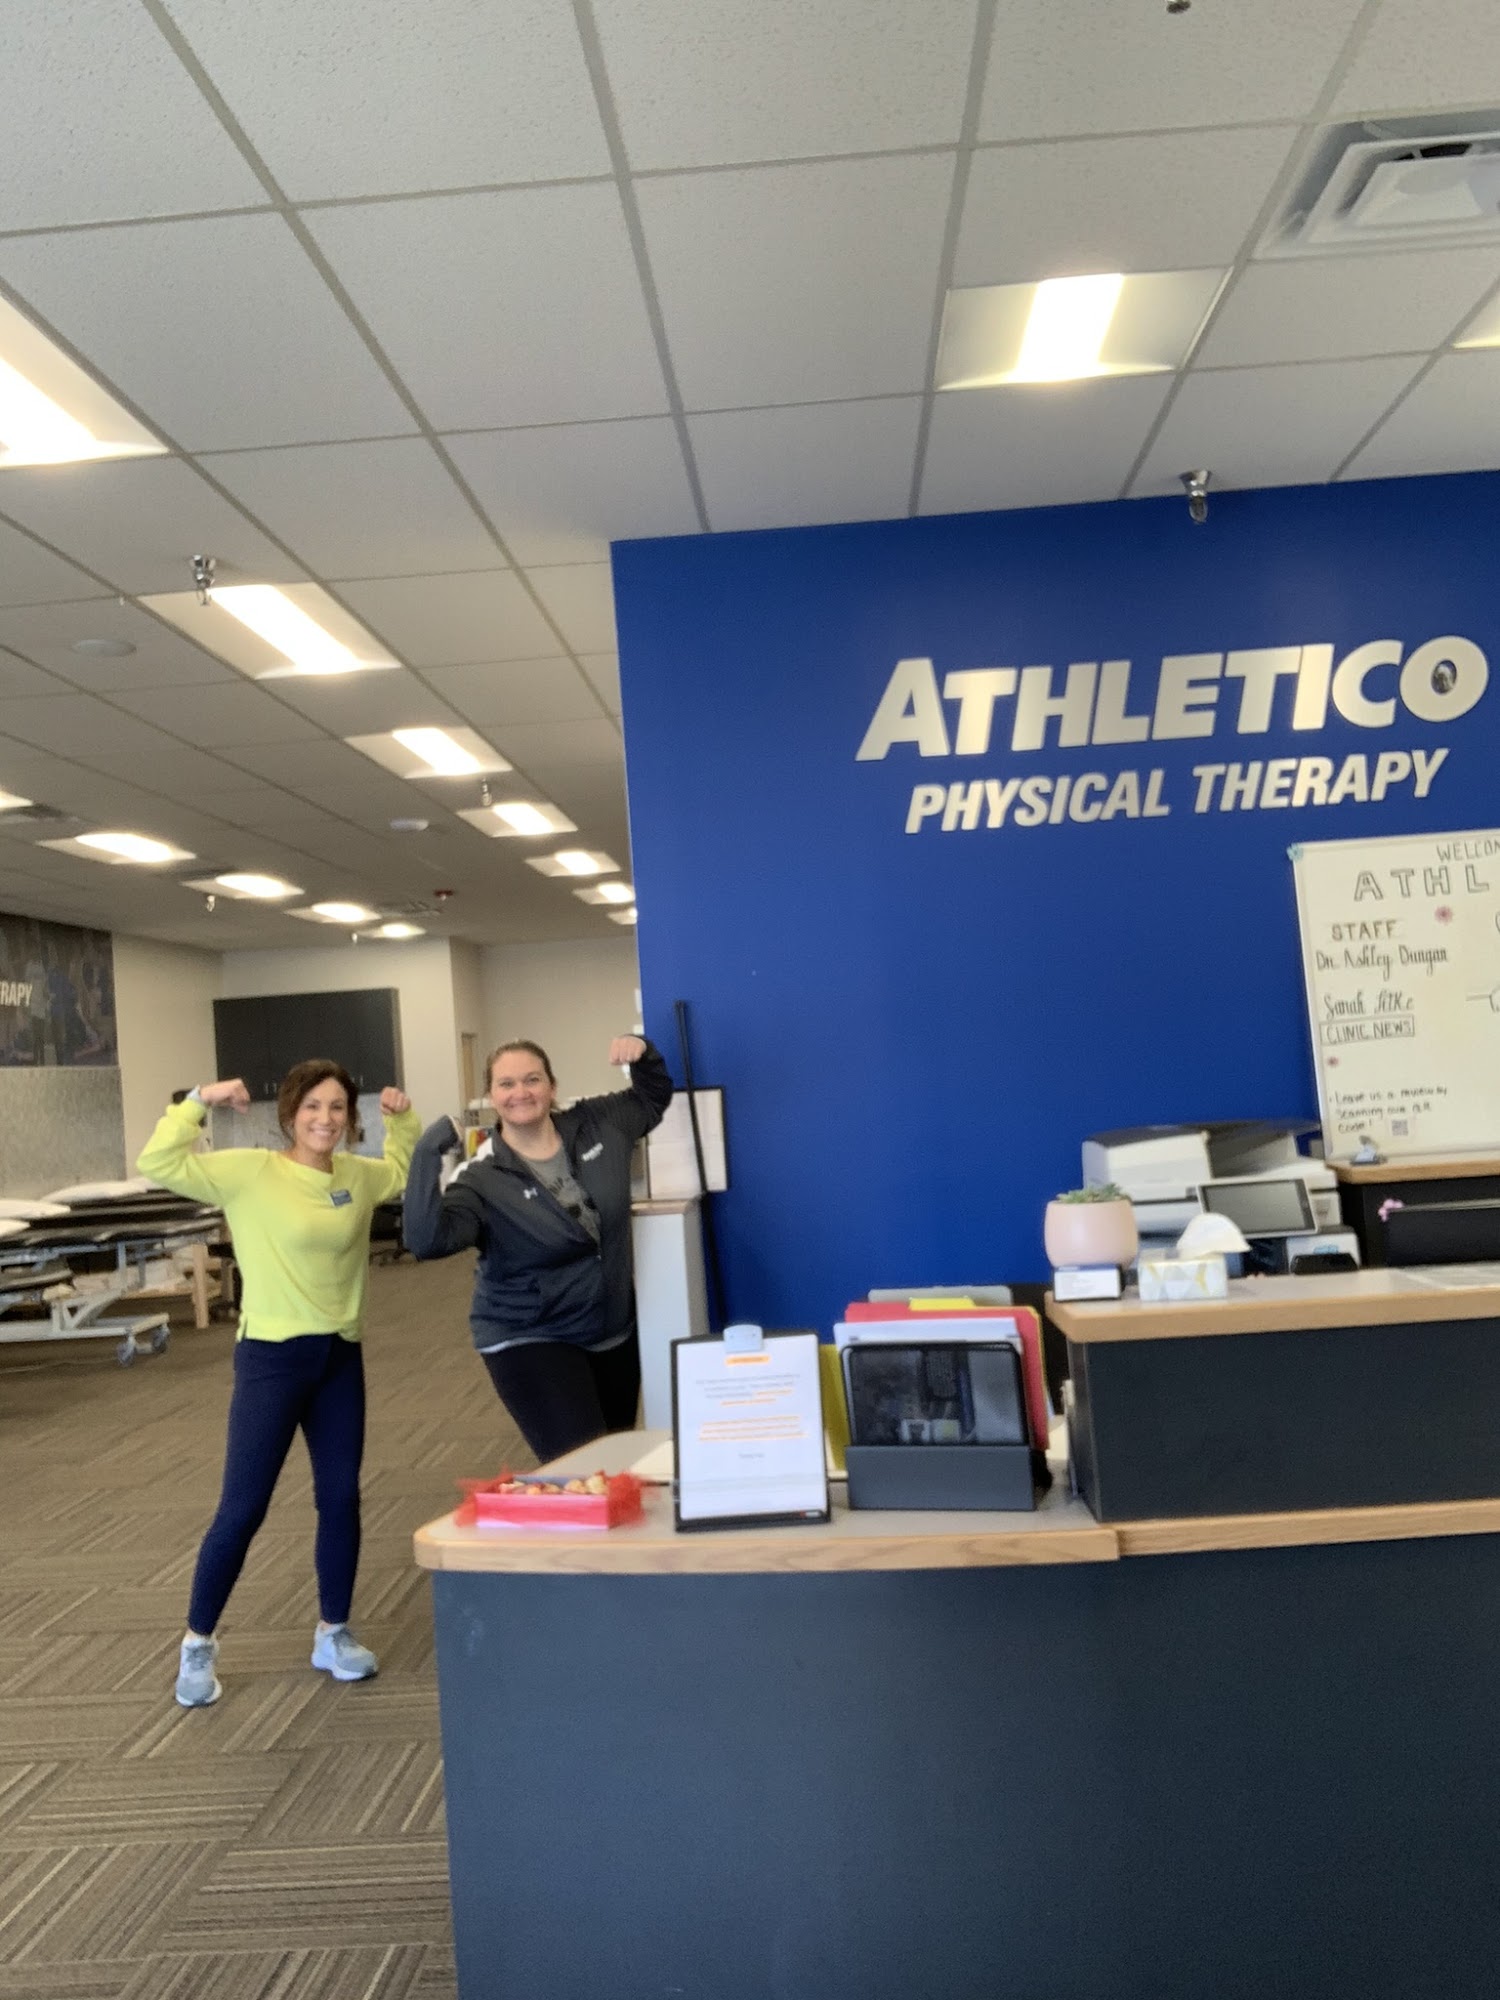 Athletico Physical Therapy - Lake Orion 1093 S Lapeer Rd, Orion Michigan 48360